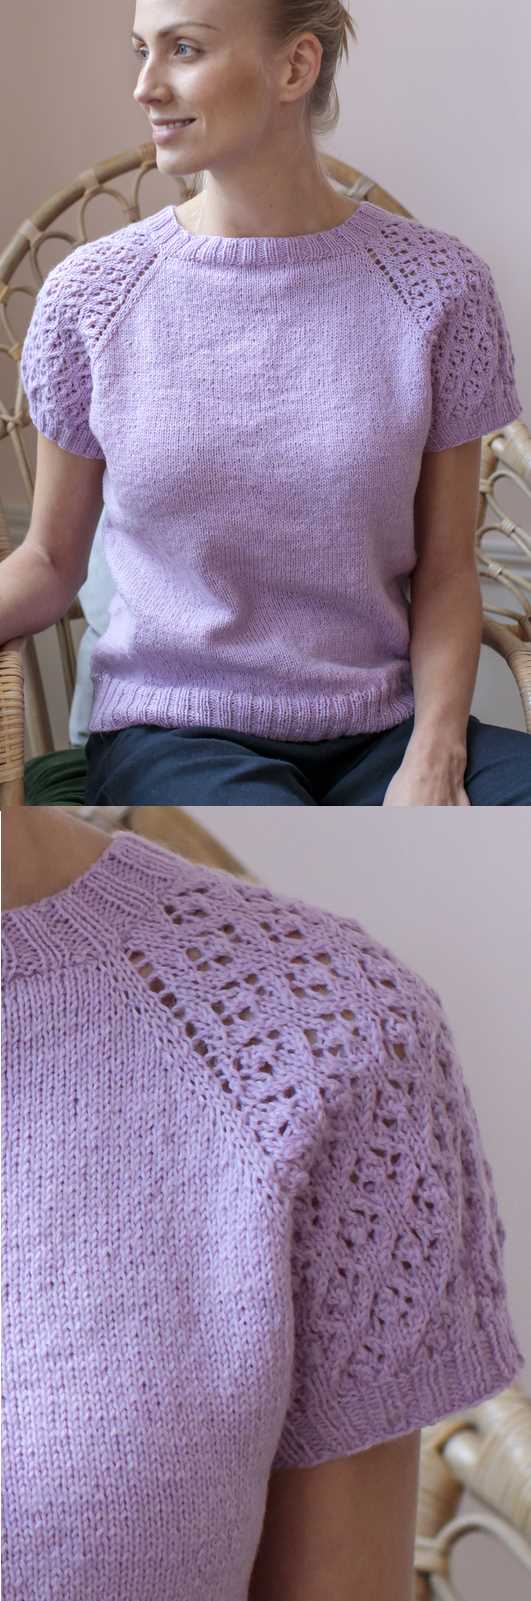 Free Knitting Pattern for a Short Sleeved Sweater - Knitting Bee